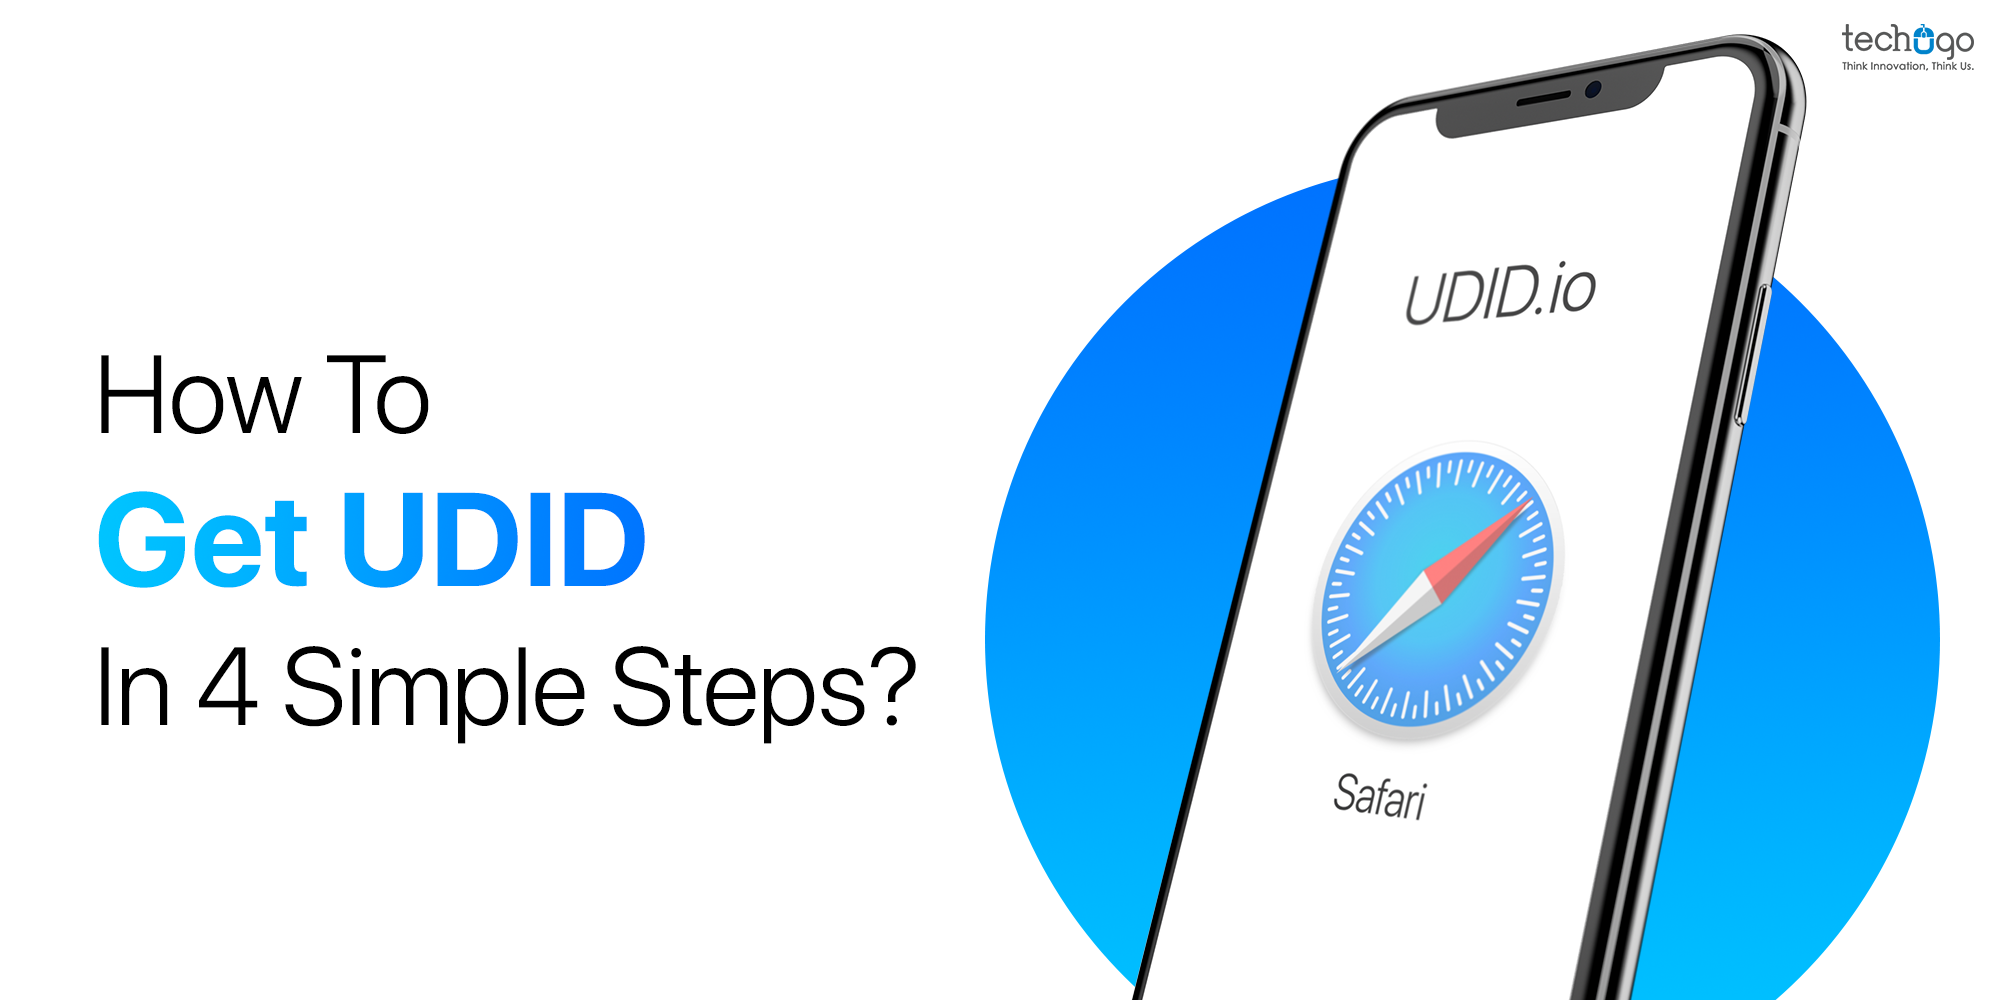 How To Get UDID In 4 Simple Steps? (UPDATED)